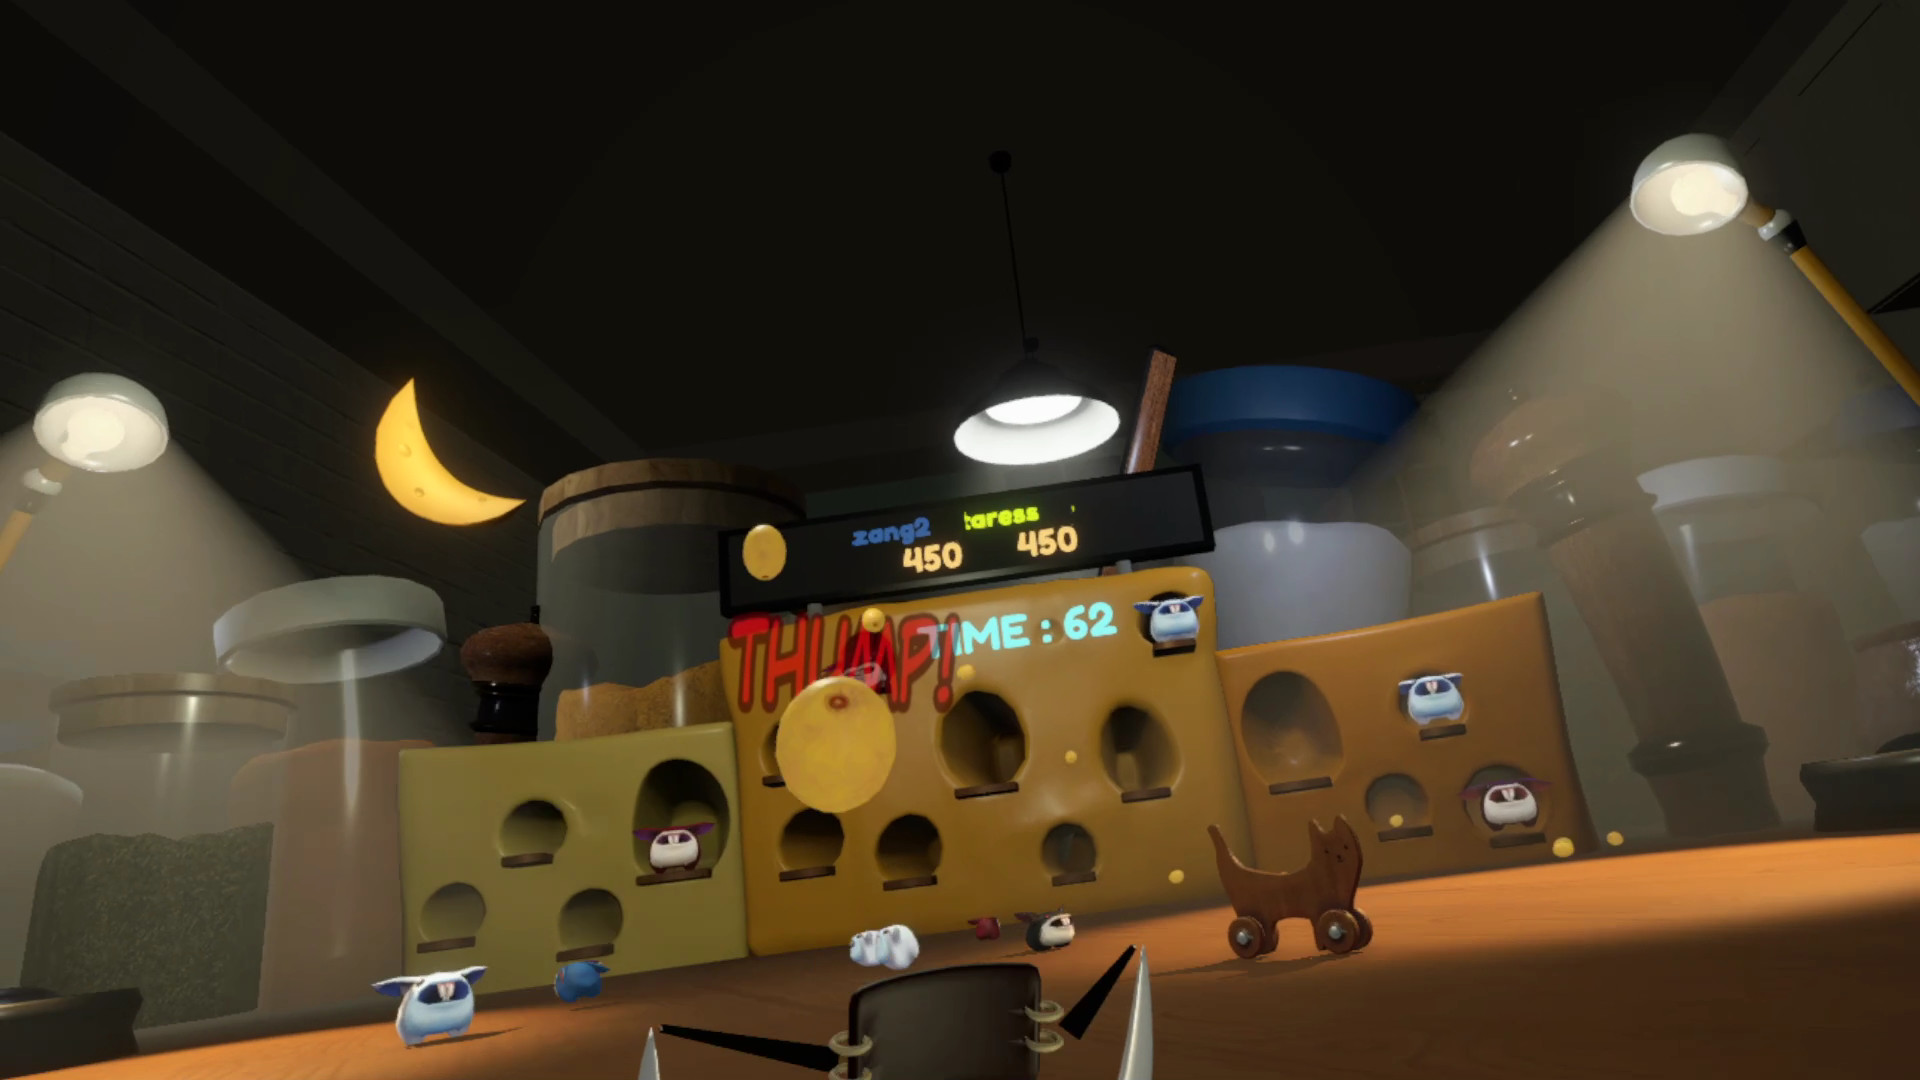 FOOD FACTORY VR Free Download